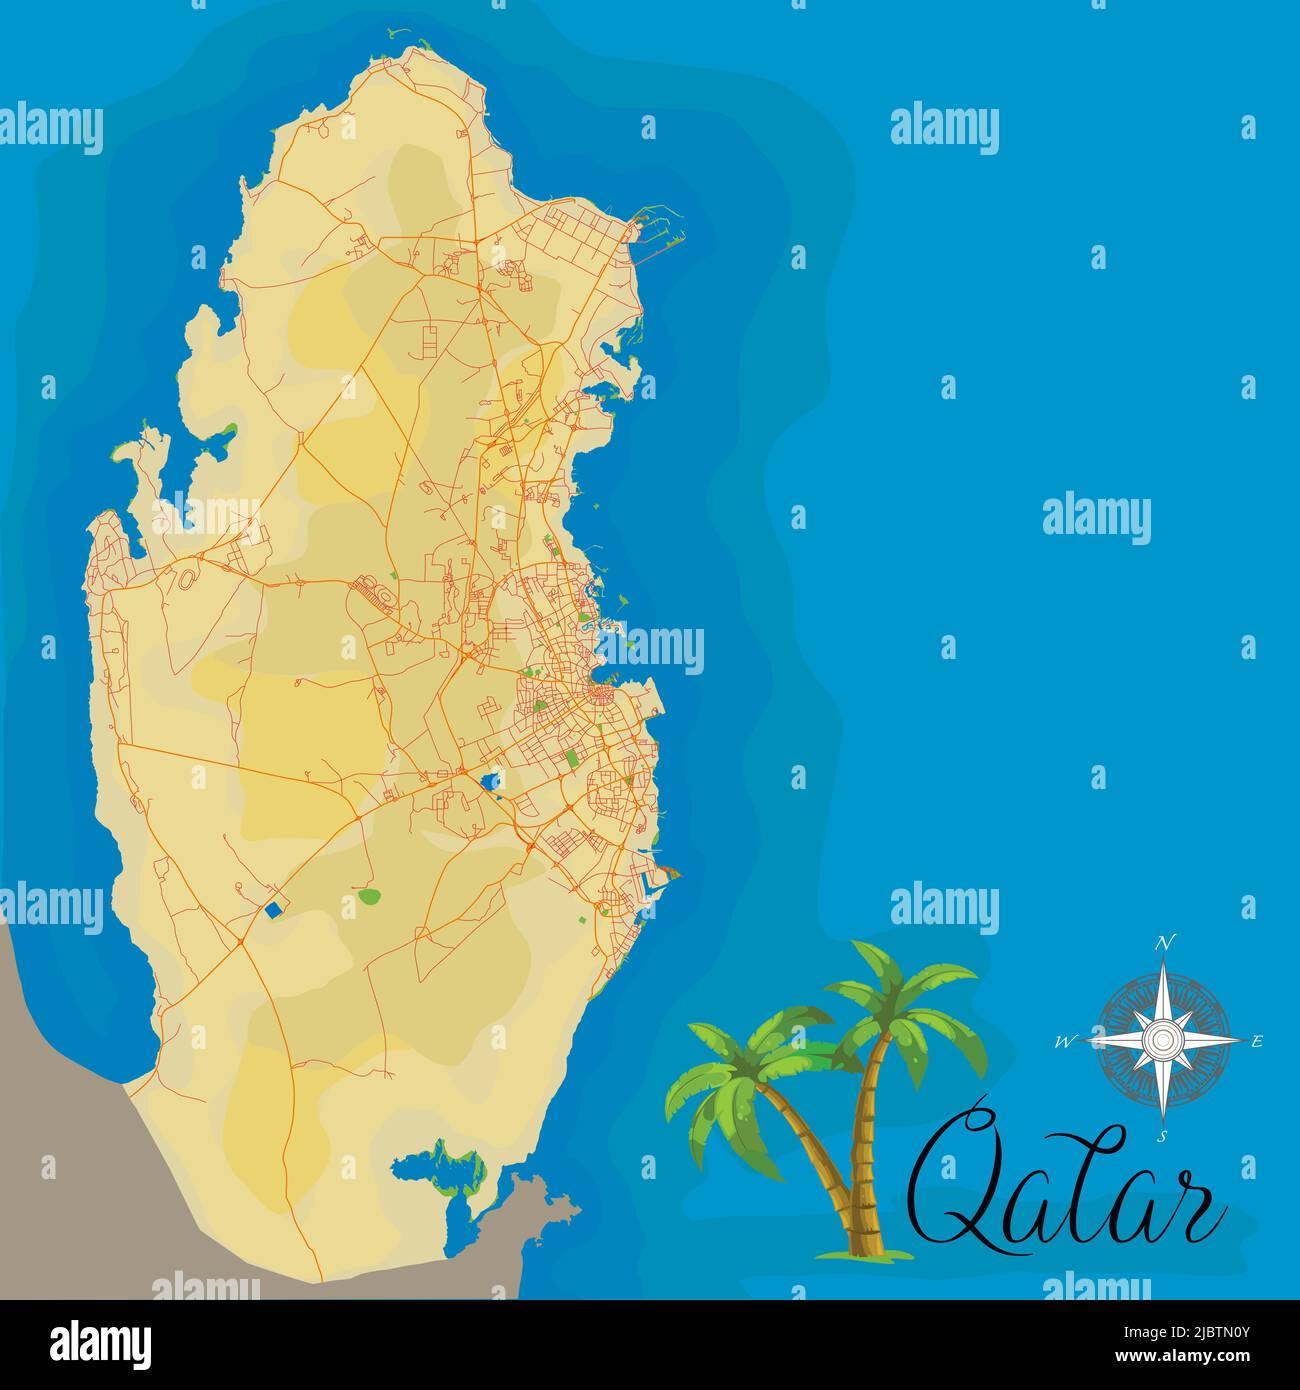 Qatar. Realistic satellite background map with roads. Drawn with cartographic accuracy. A bird's-eye view. Stock Vector